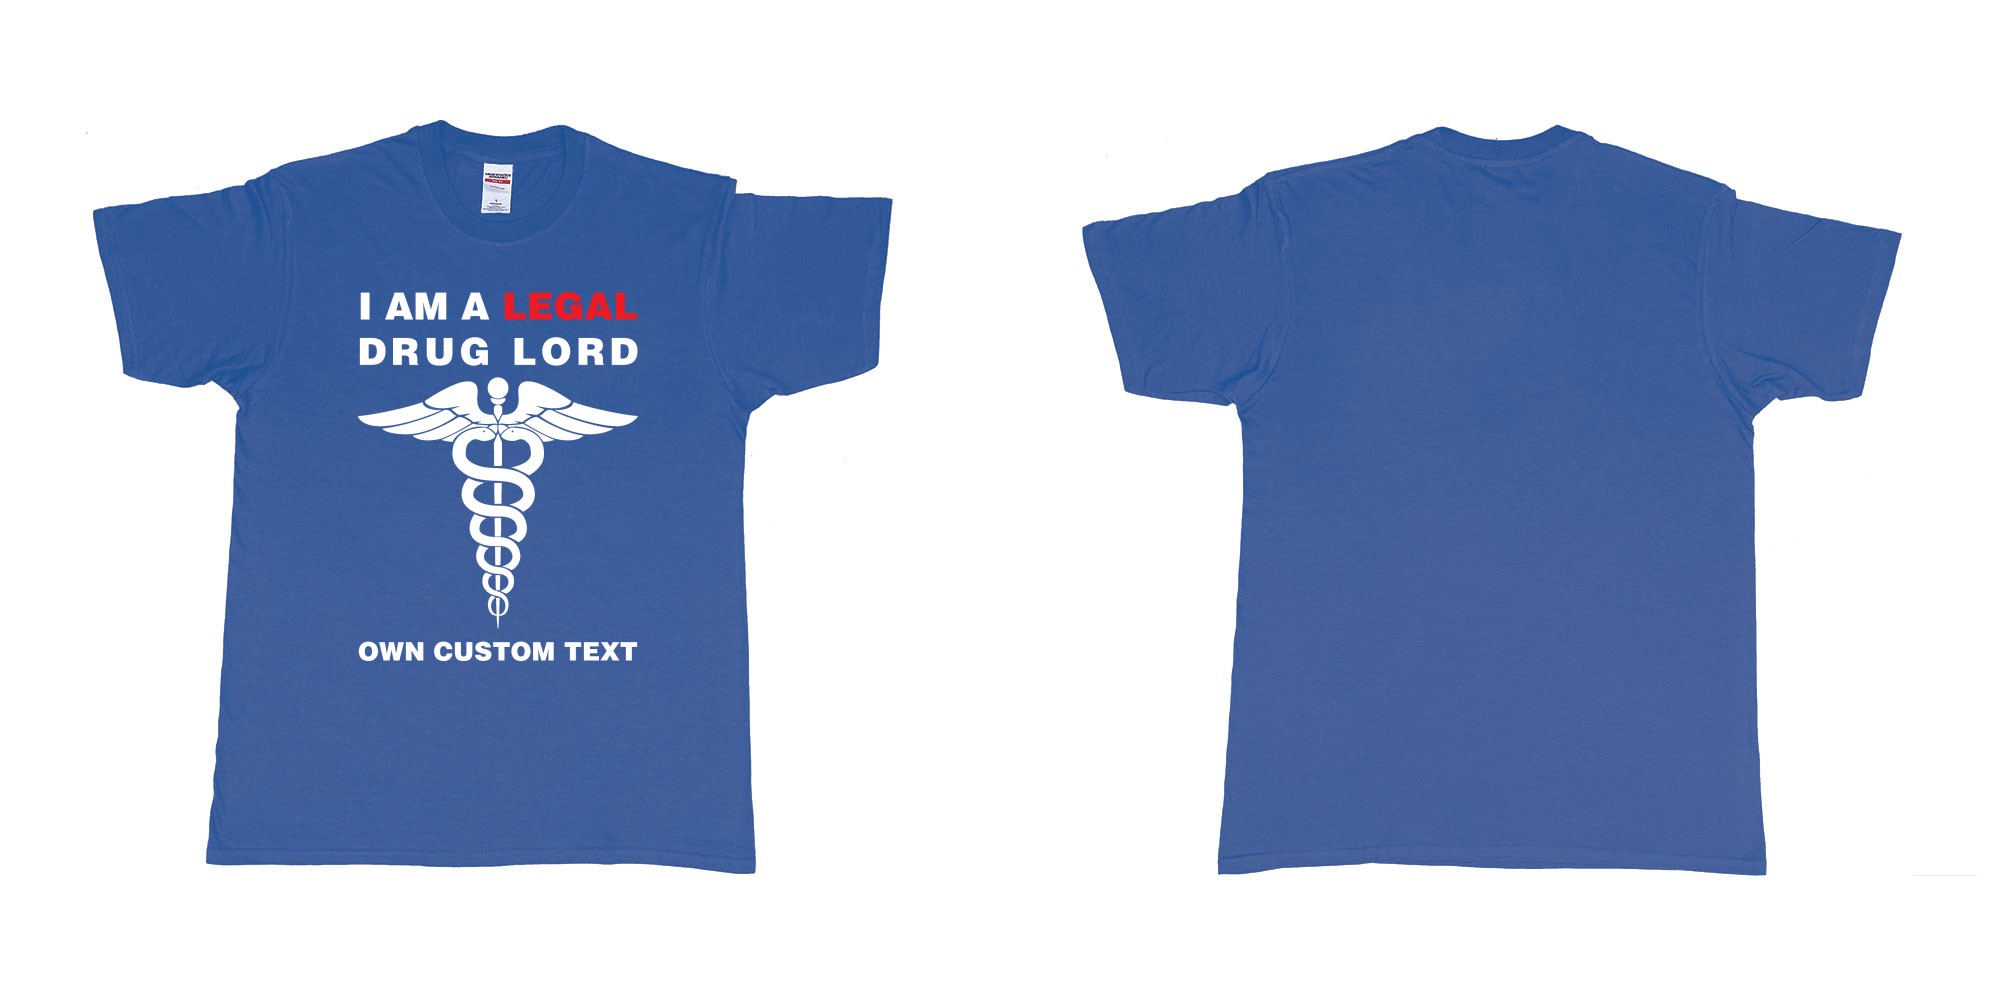 Custom tshirt design legal drug lord in fabric color royal-blue choice your own text made in Bali by The Pirate Way